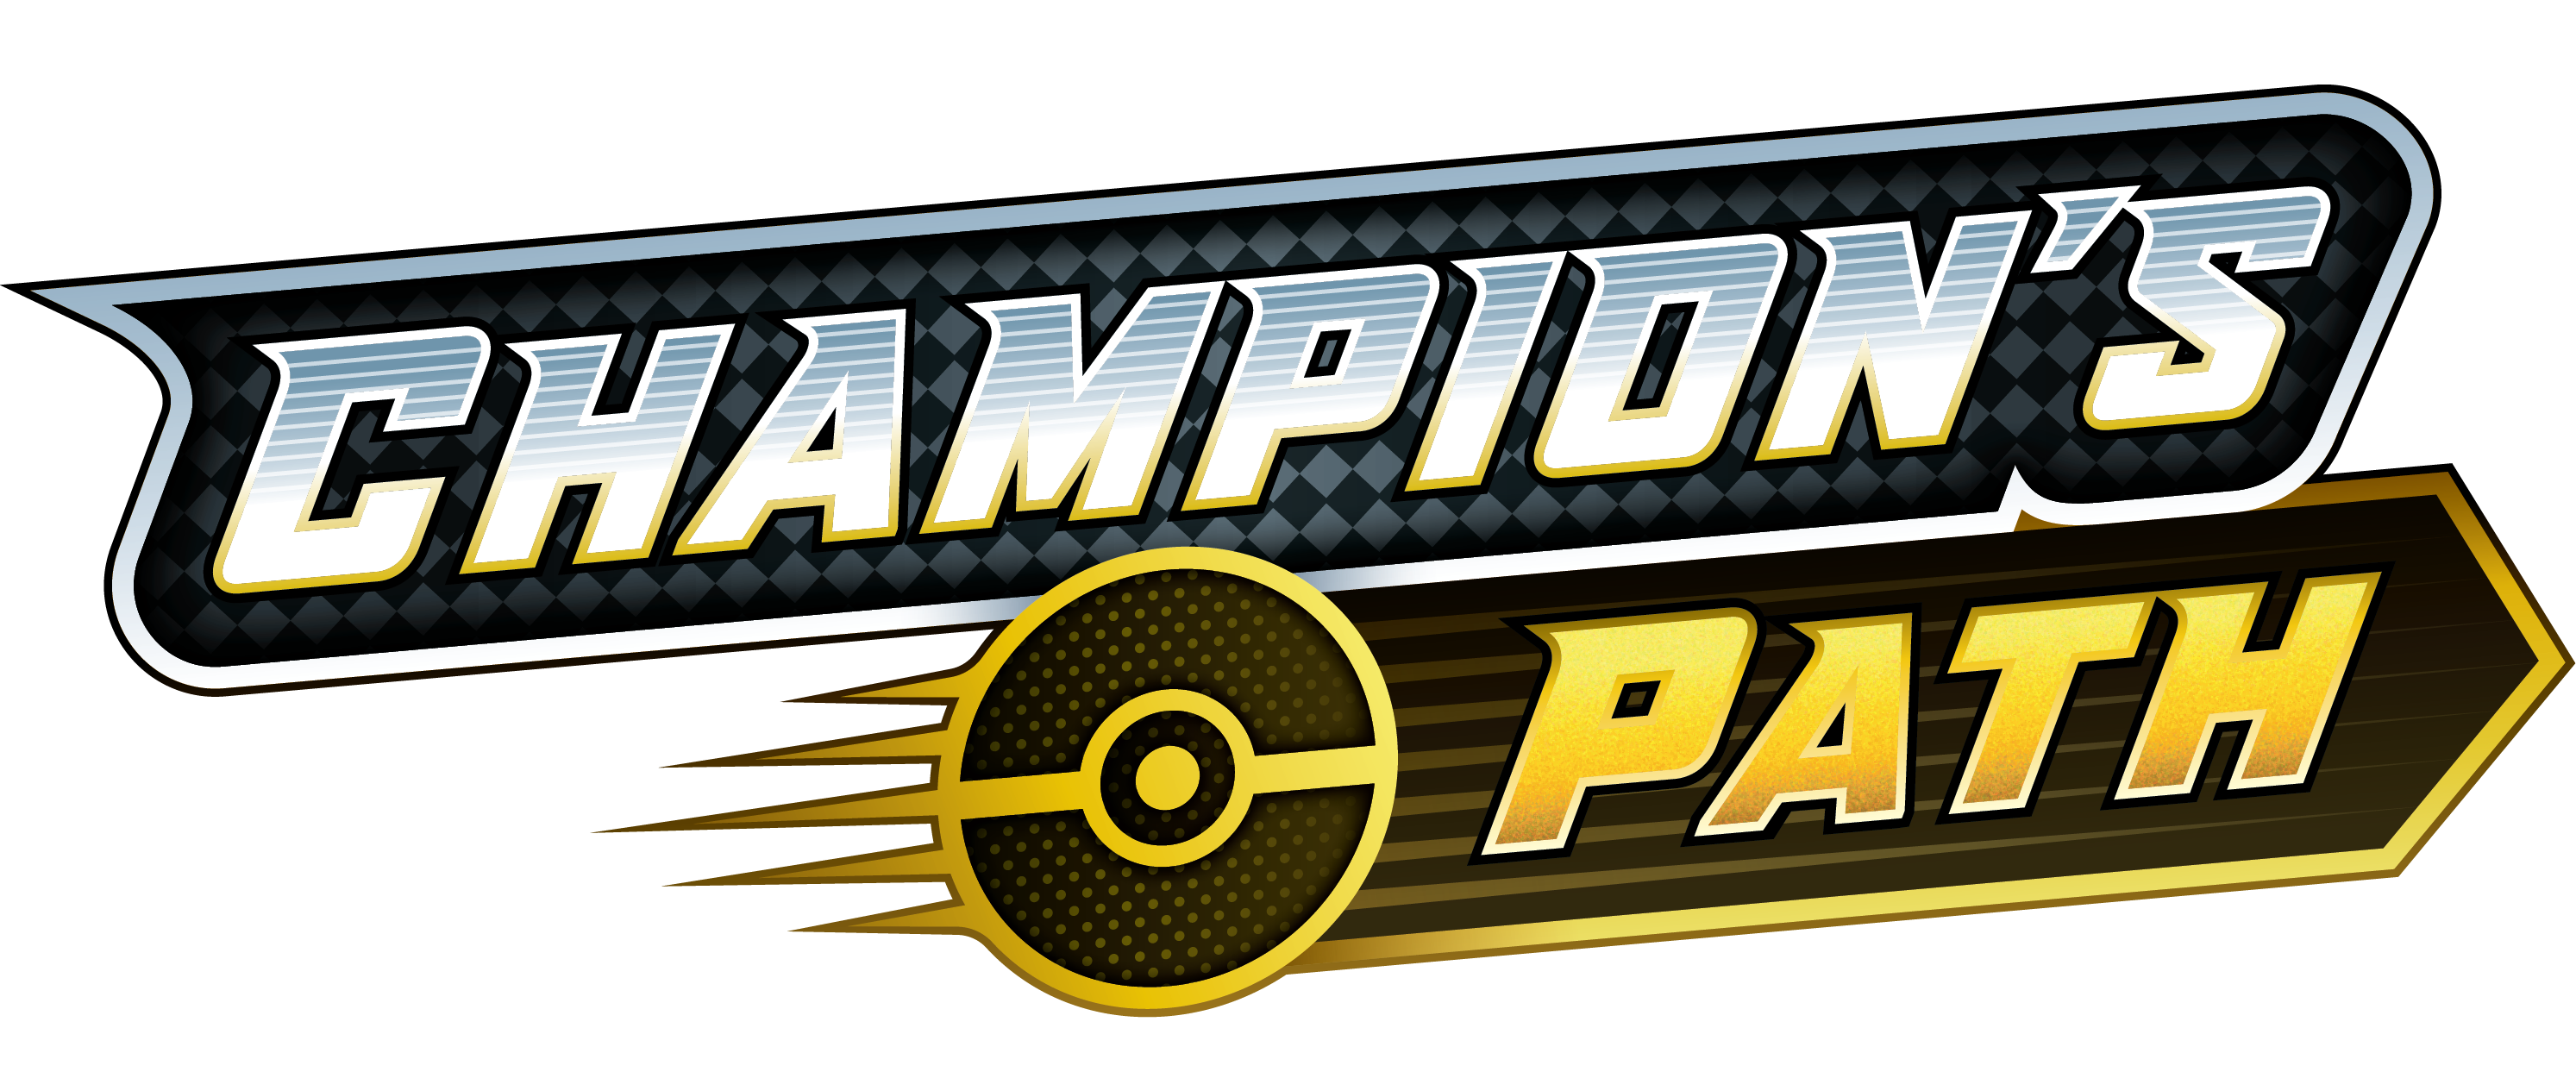 blog Gold rush - Champions Path arrives to the scene